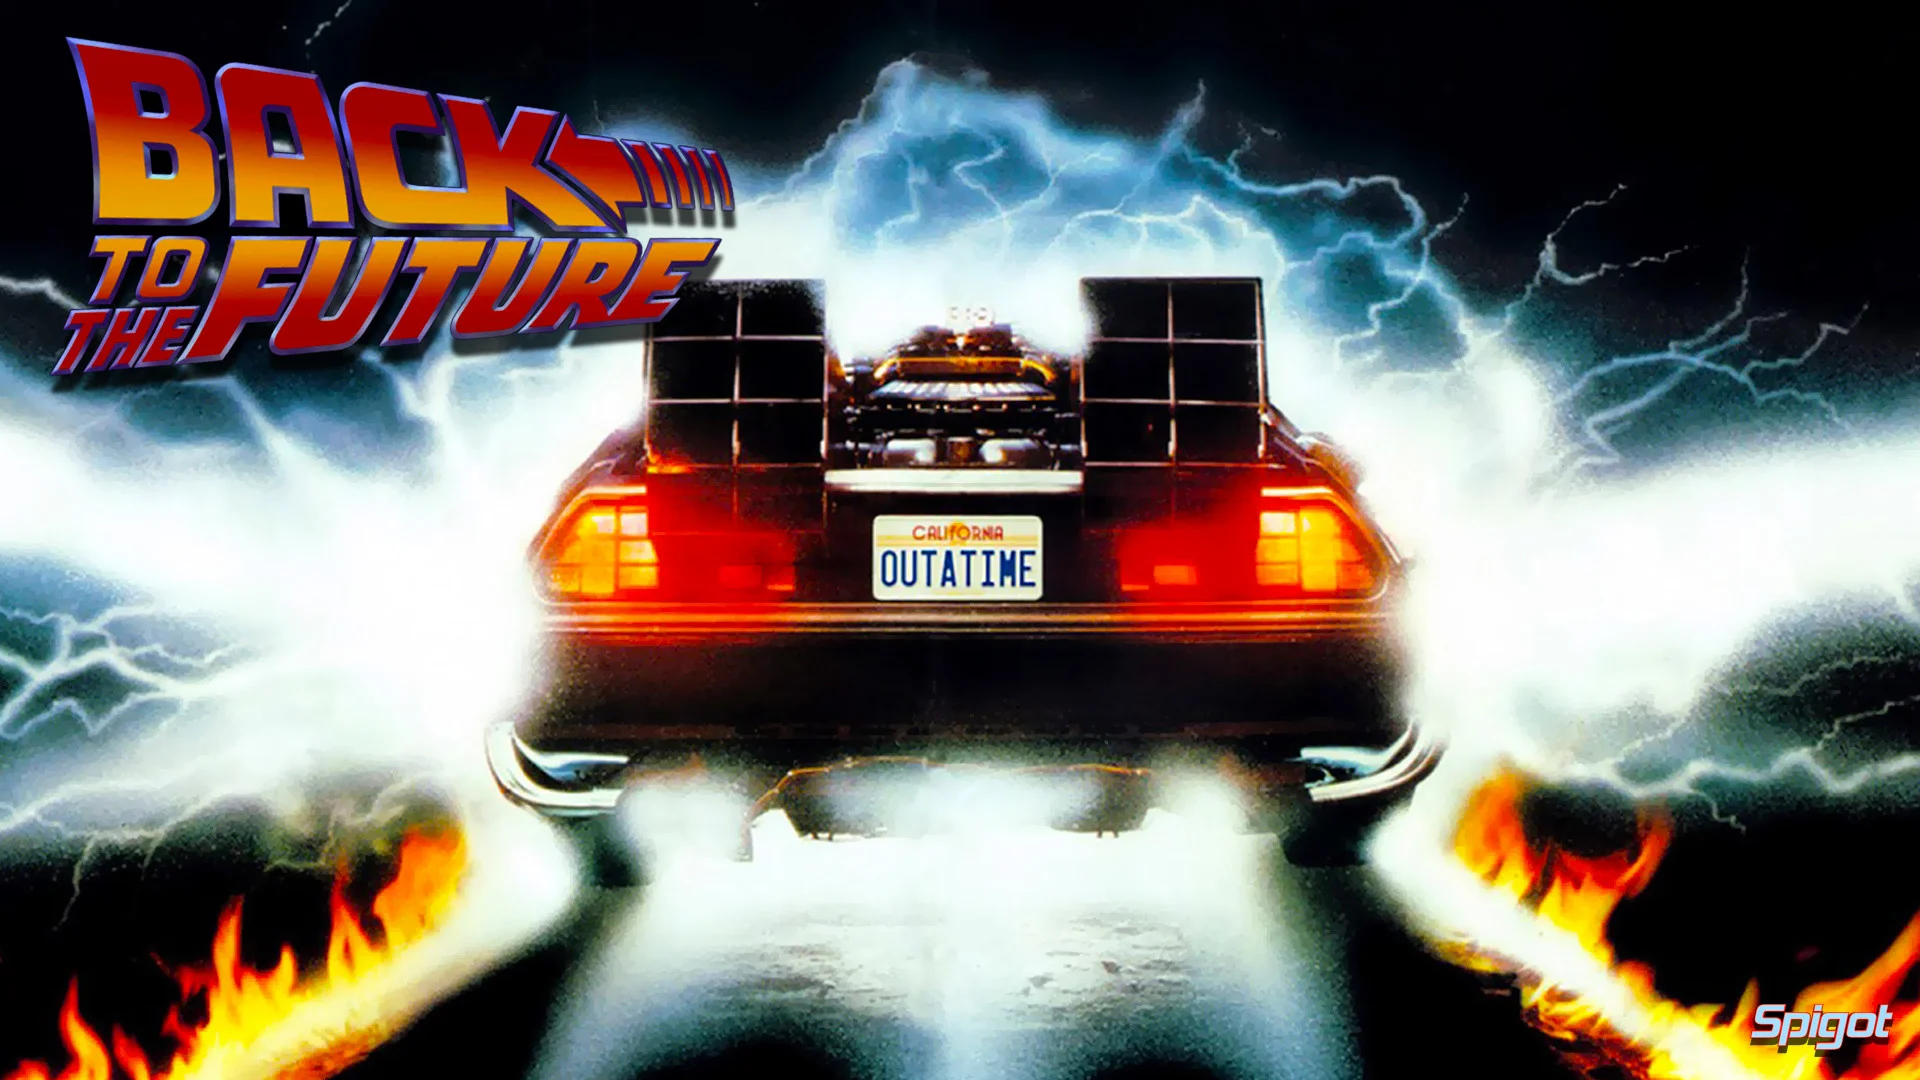 Back To The Future images